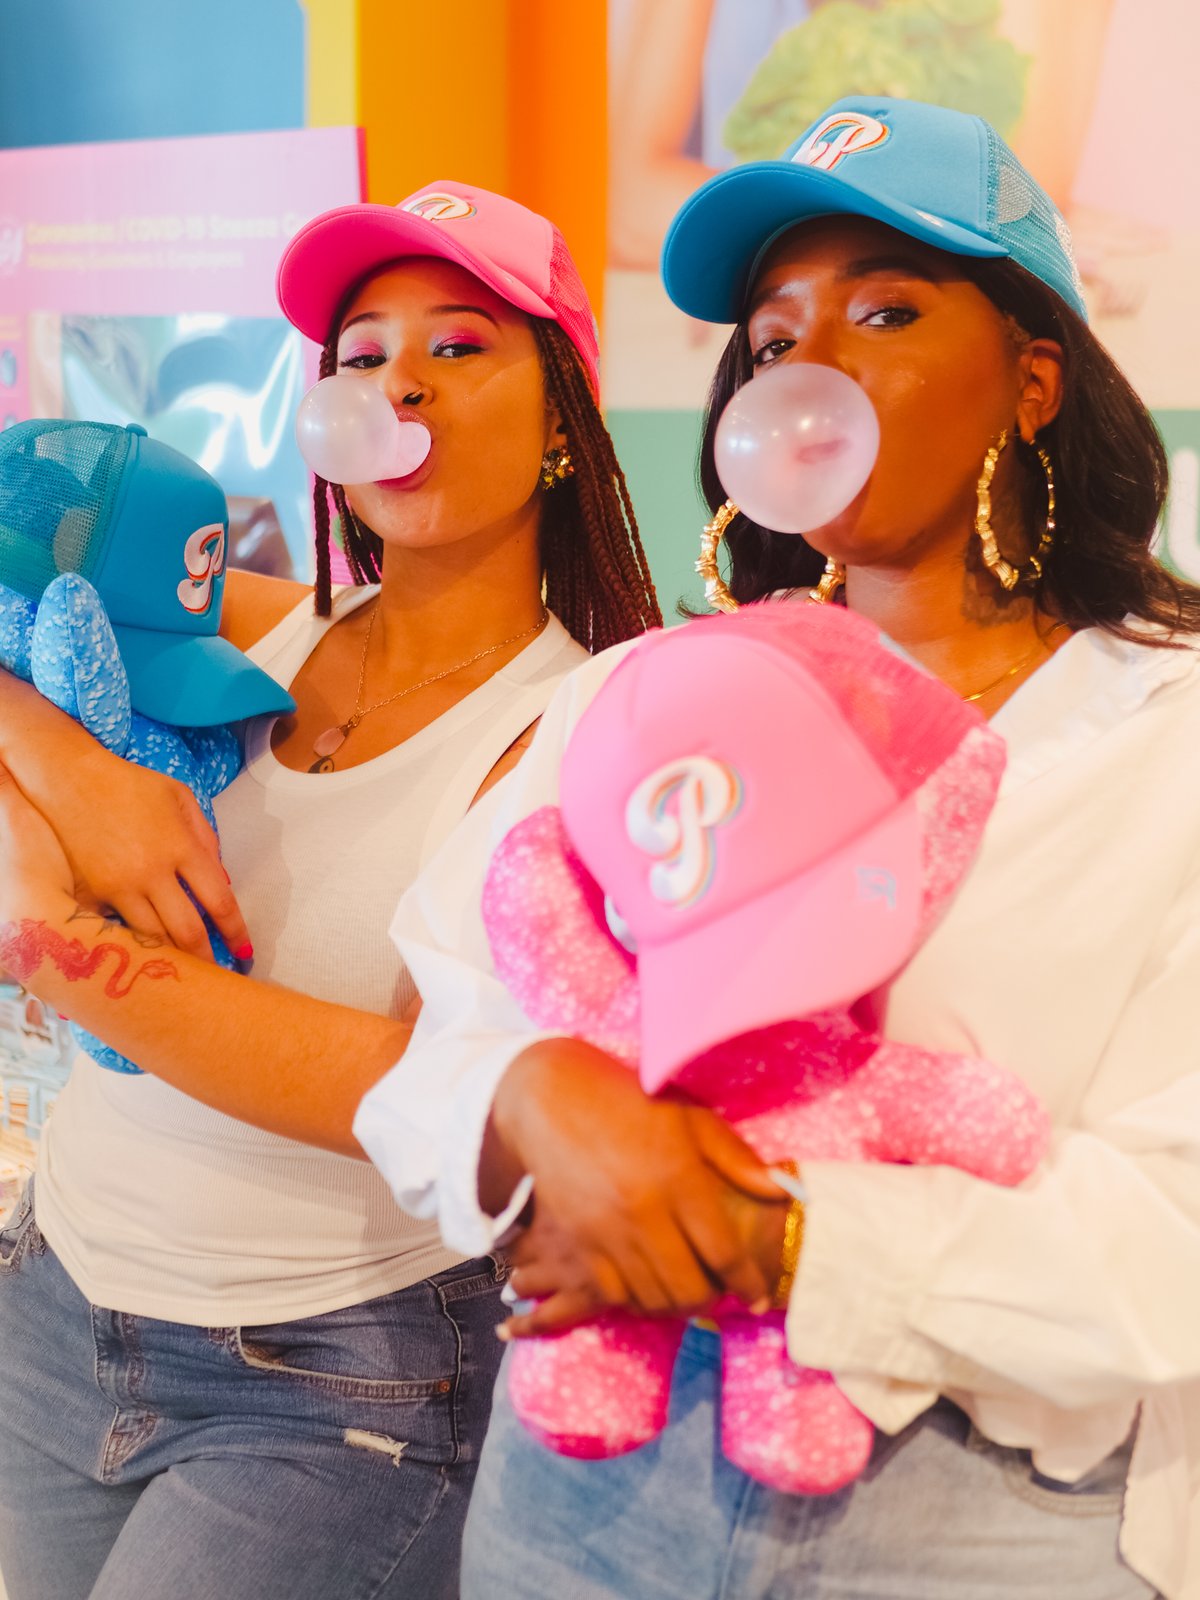 THE BUBBLE GUM COLLECTION (TMCDE HATS V3)